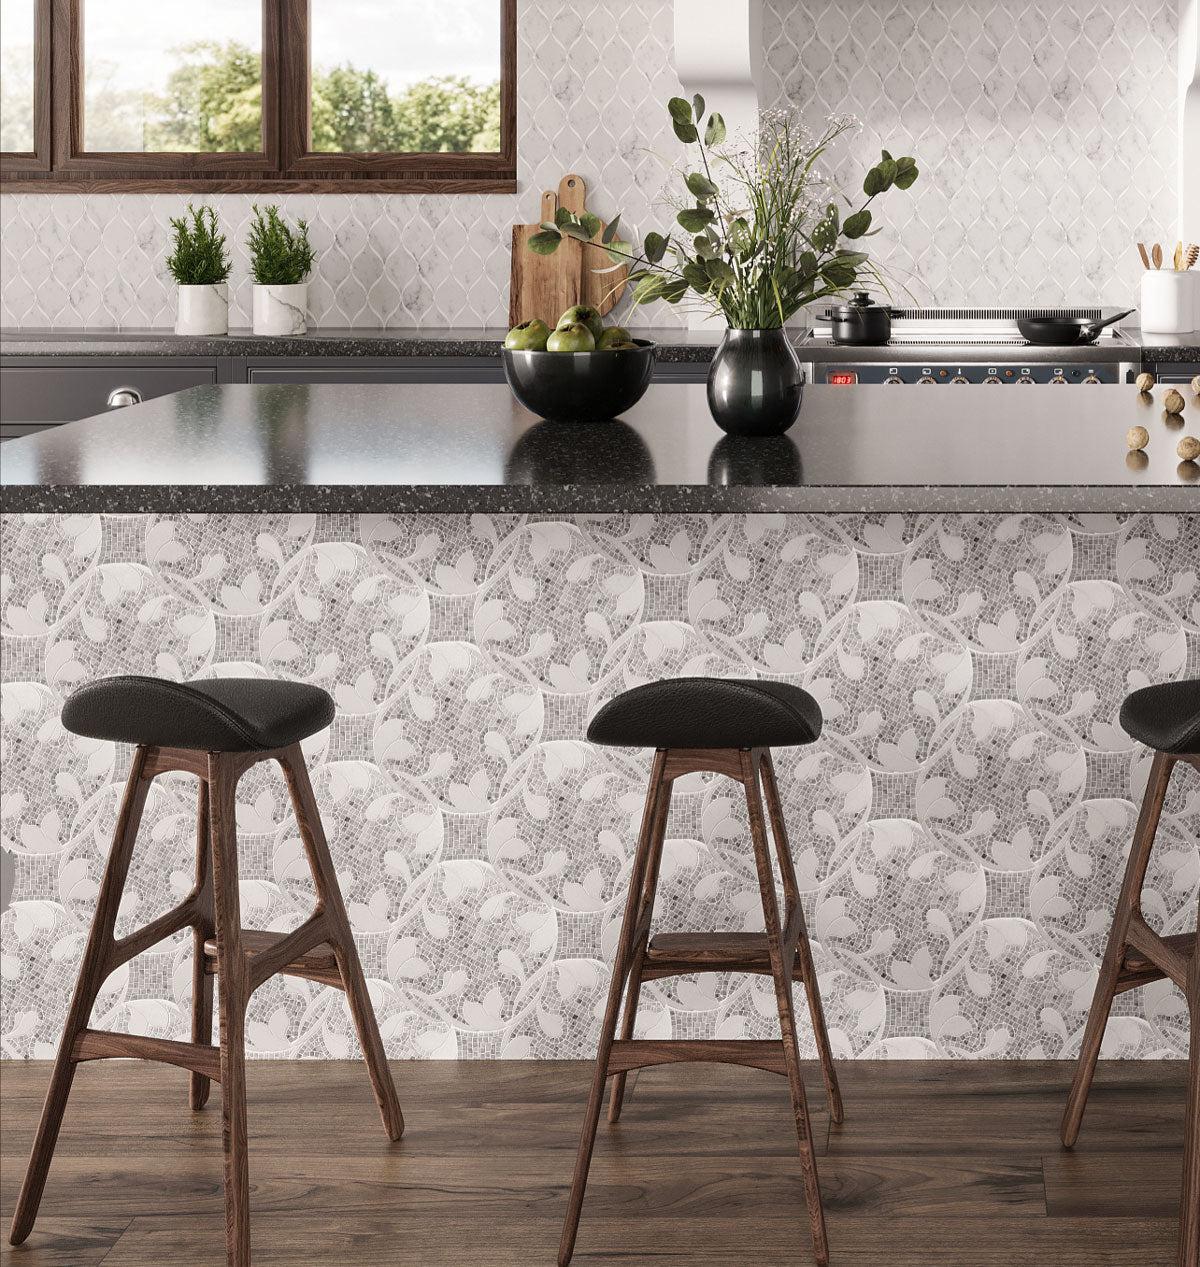 Mircro Mosaic with floral patterned tile for a gray and white decorative kitchen island